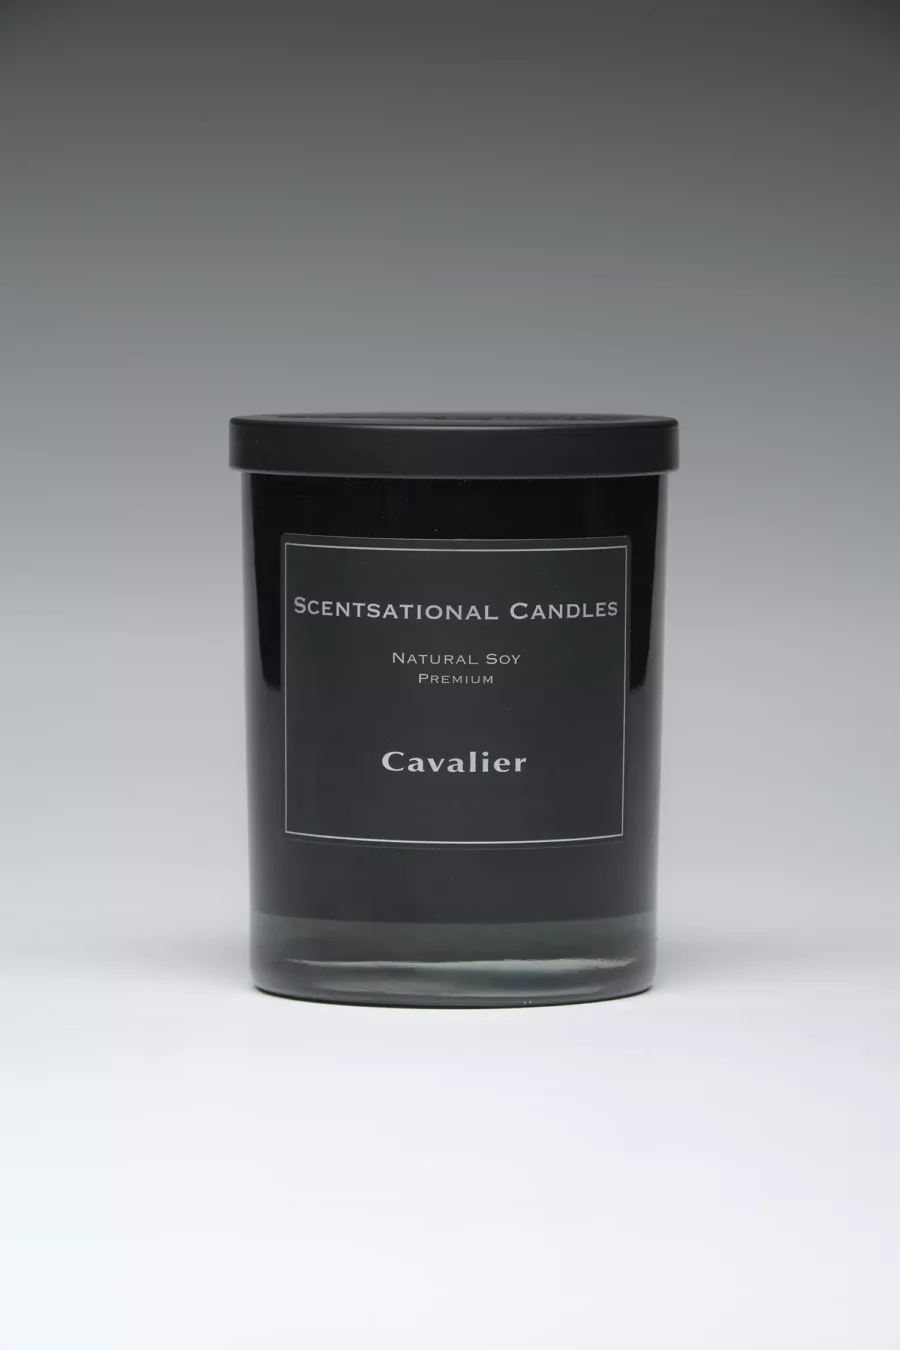 Cavalier – 11oz scented candle